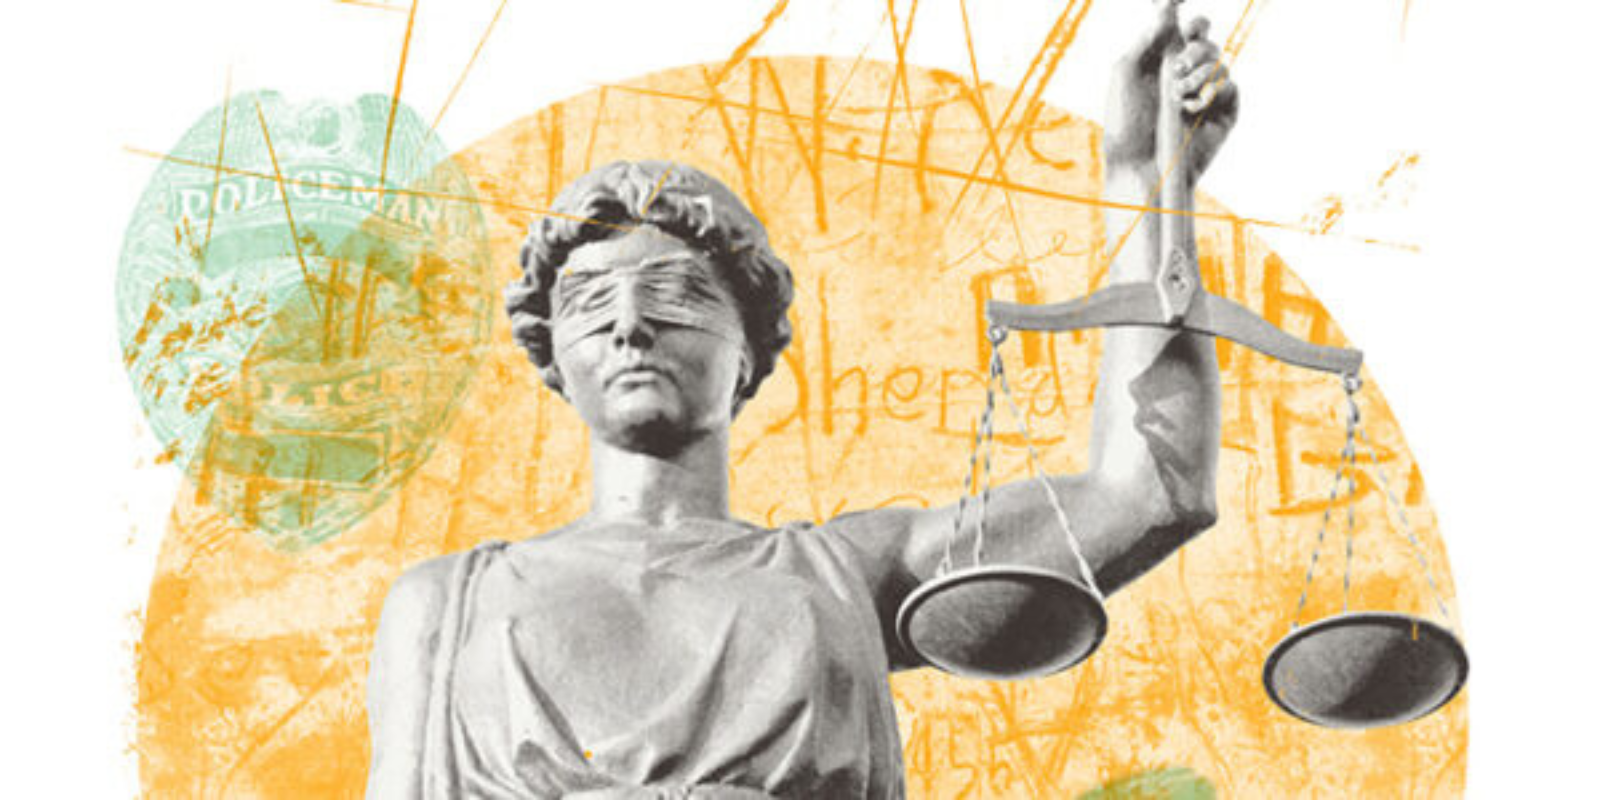 Graphic with lady justice holding the scale to symbolize criminal legal reform